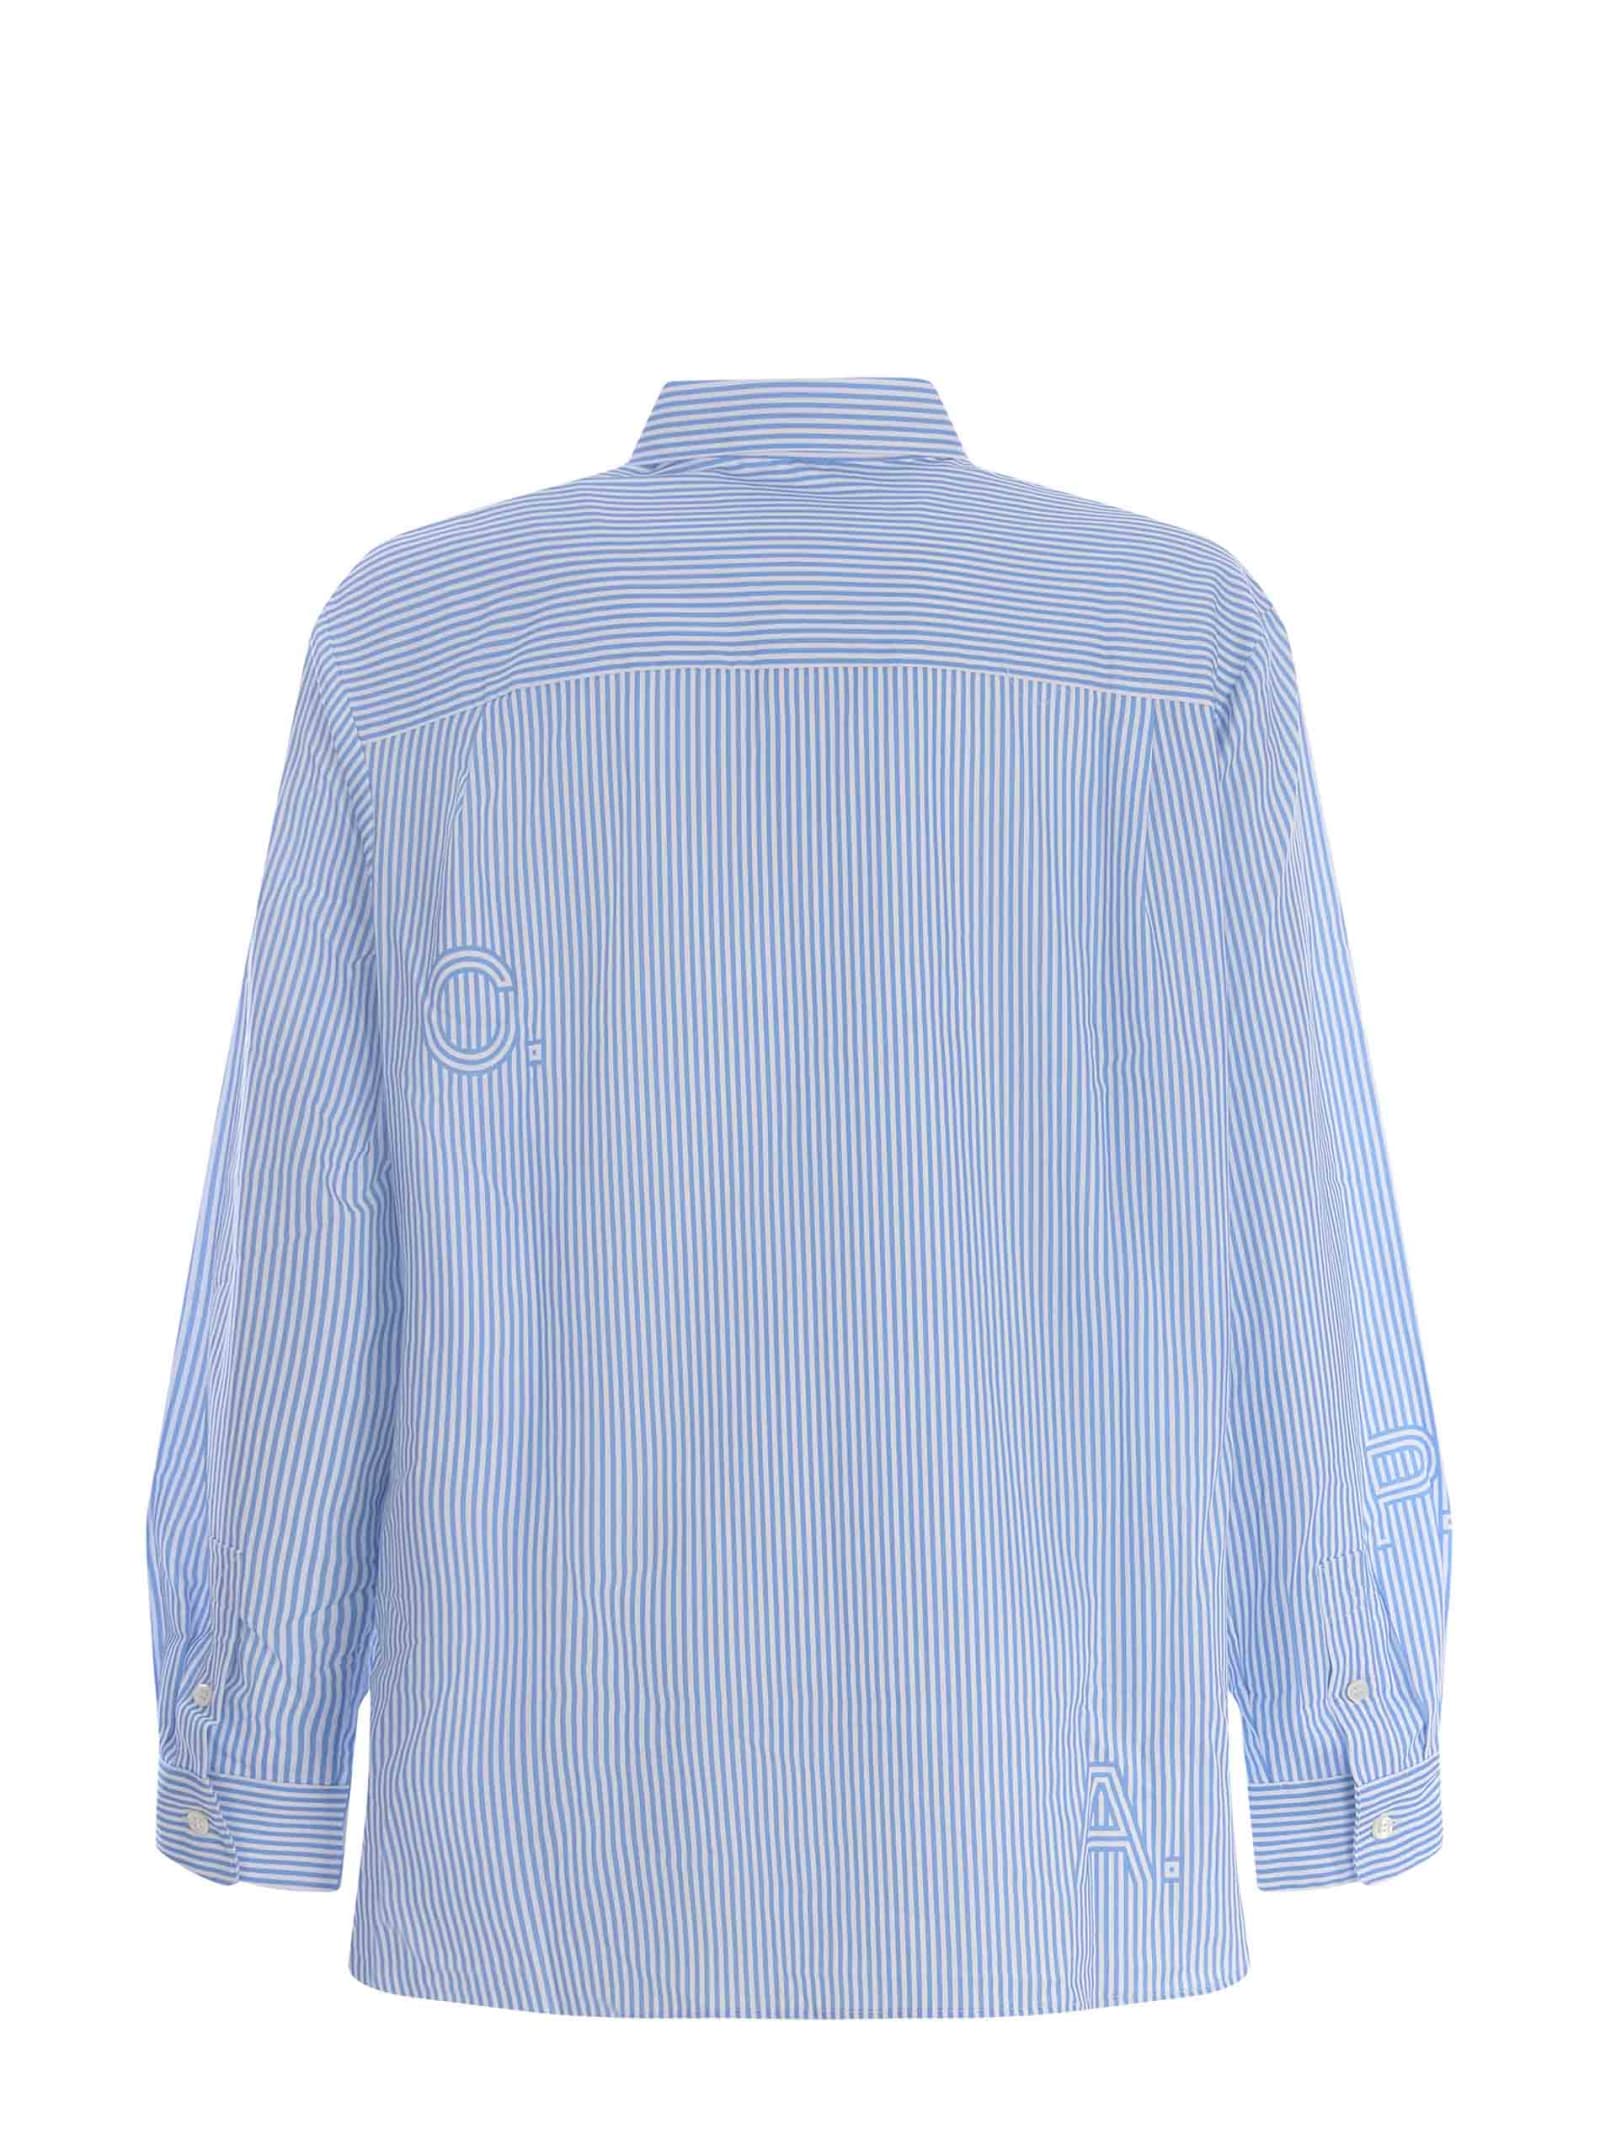 Shop Apc Shirt A.p.c. Malo Made Of Cotton In Light Blue